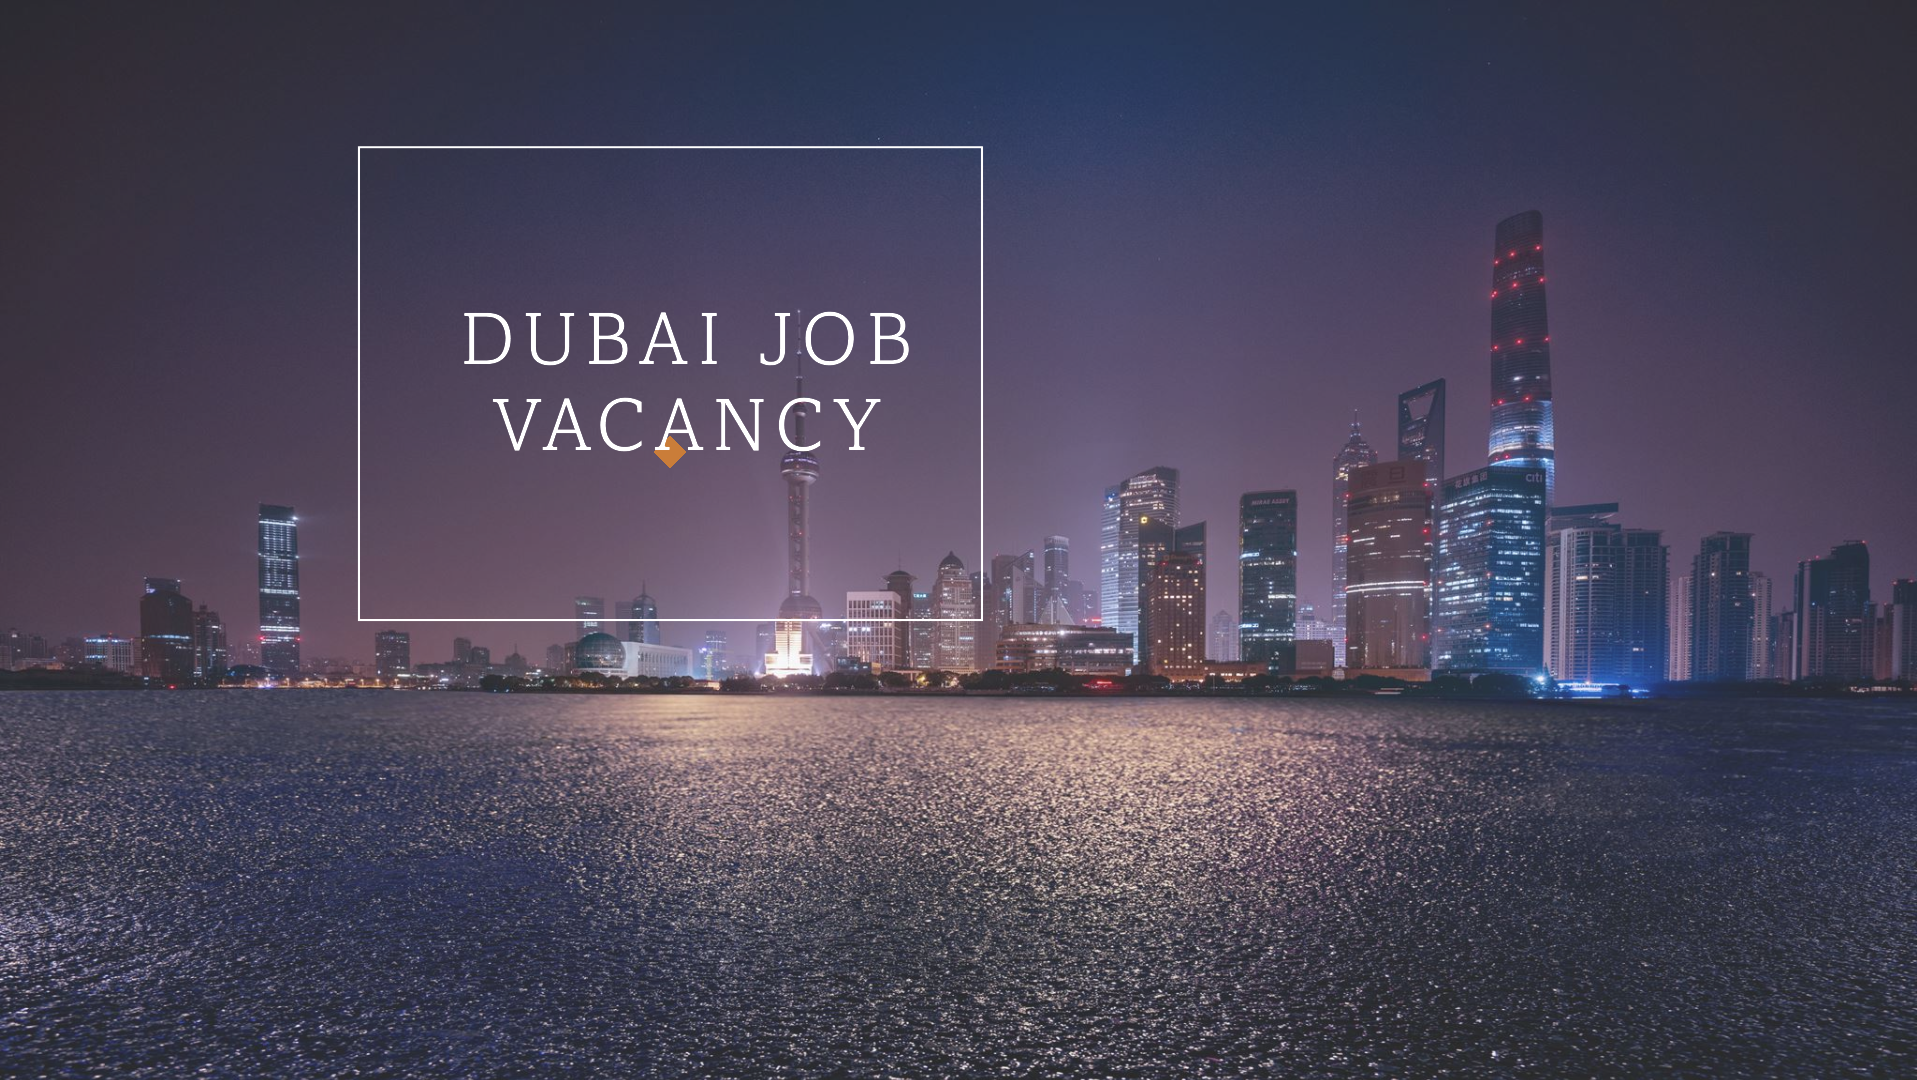 Job opportunities for Arabic and English speakers in Dubai